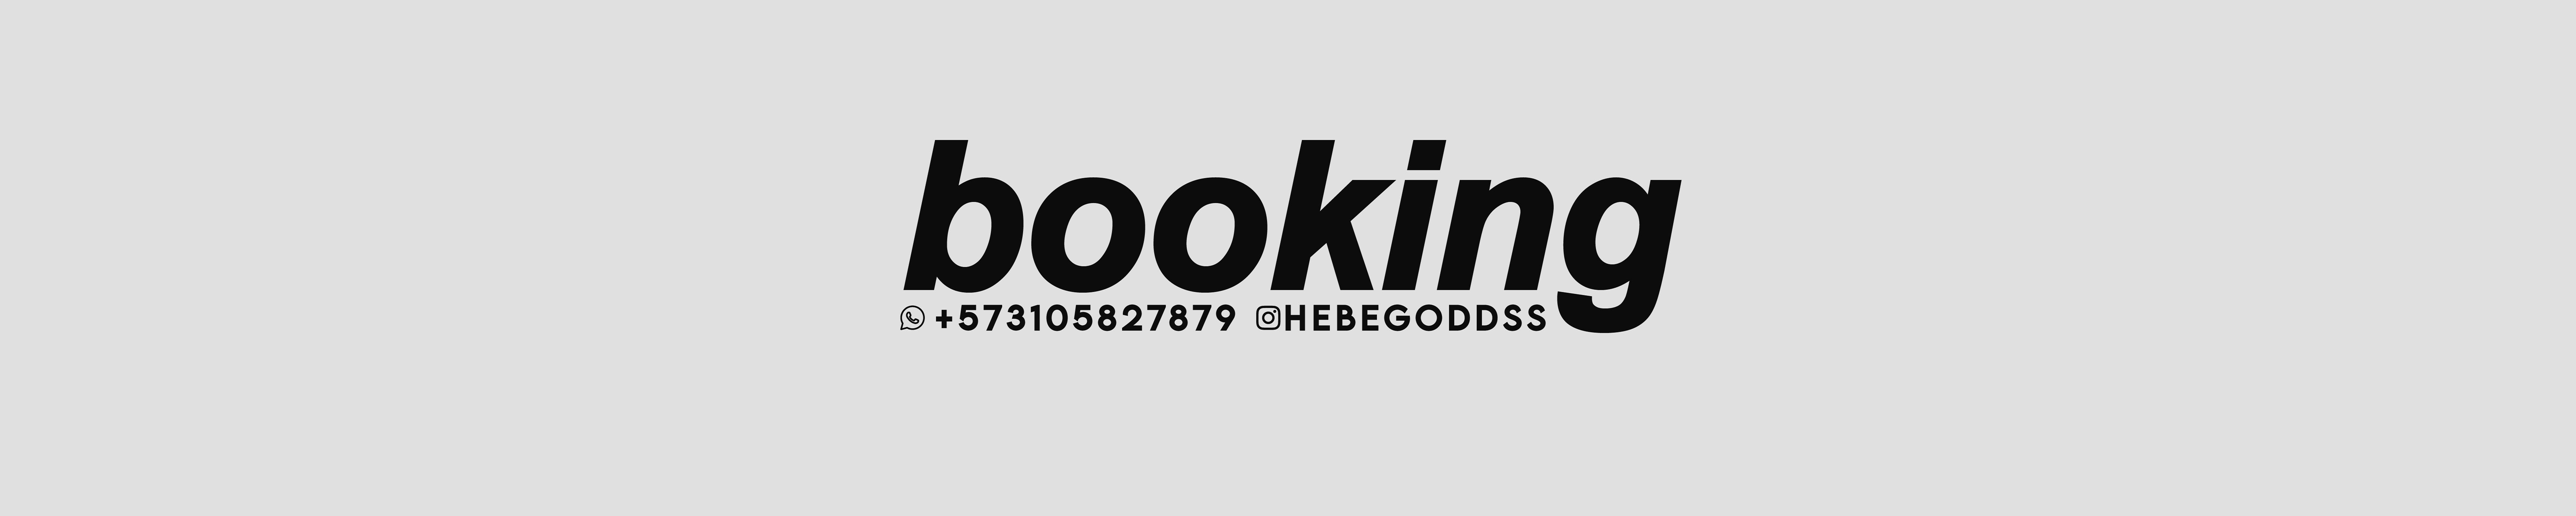 Hebe ®'s profile banner